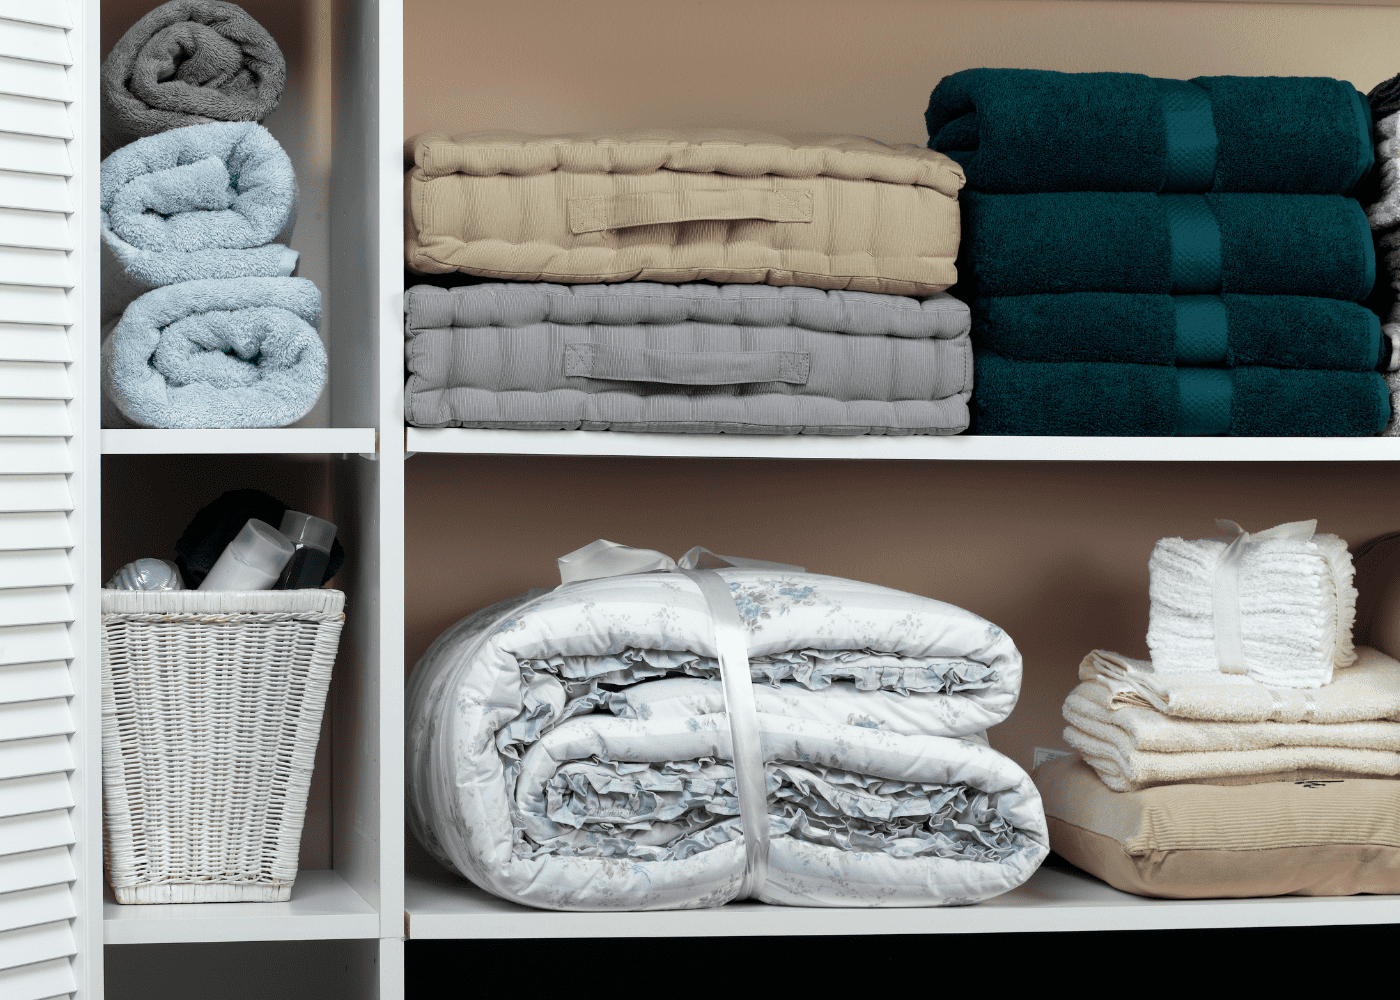 A linen closet with folded towels and other bedding items.